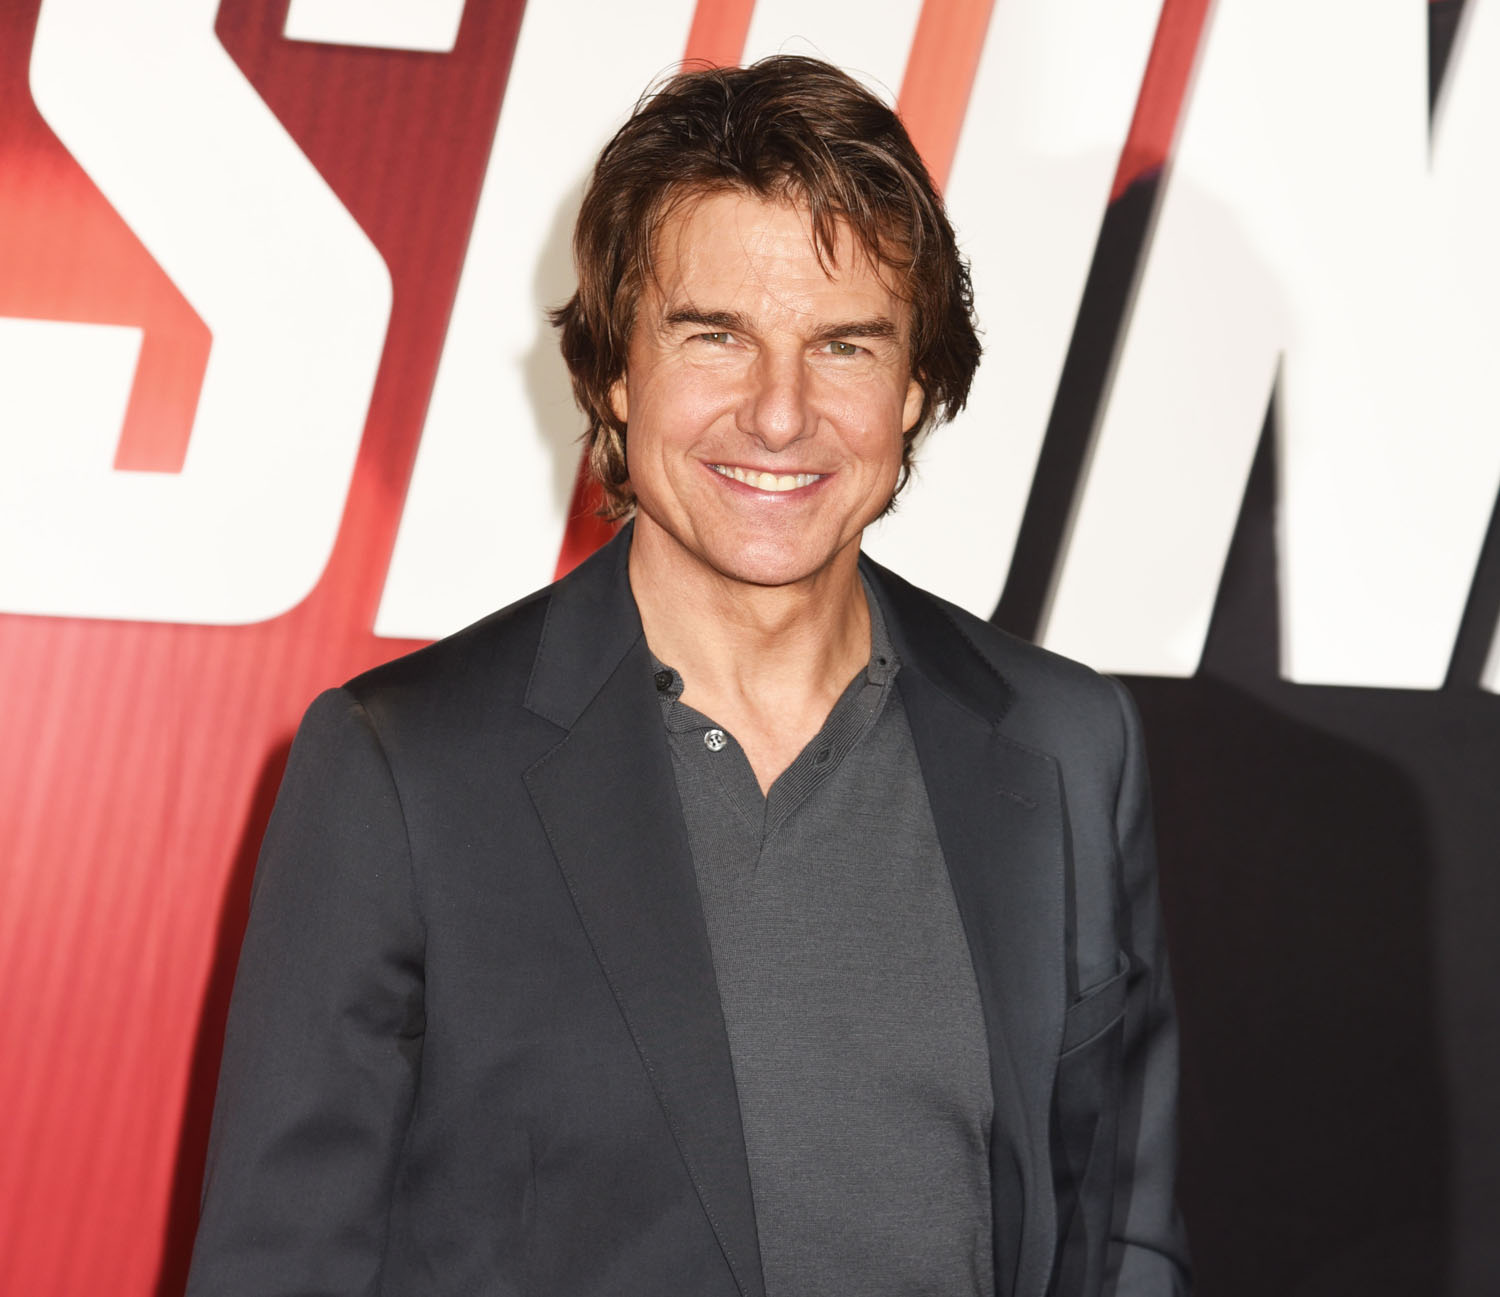 Tom Cruise is making movies with Warners now in a new partnership with